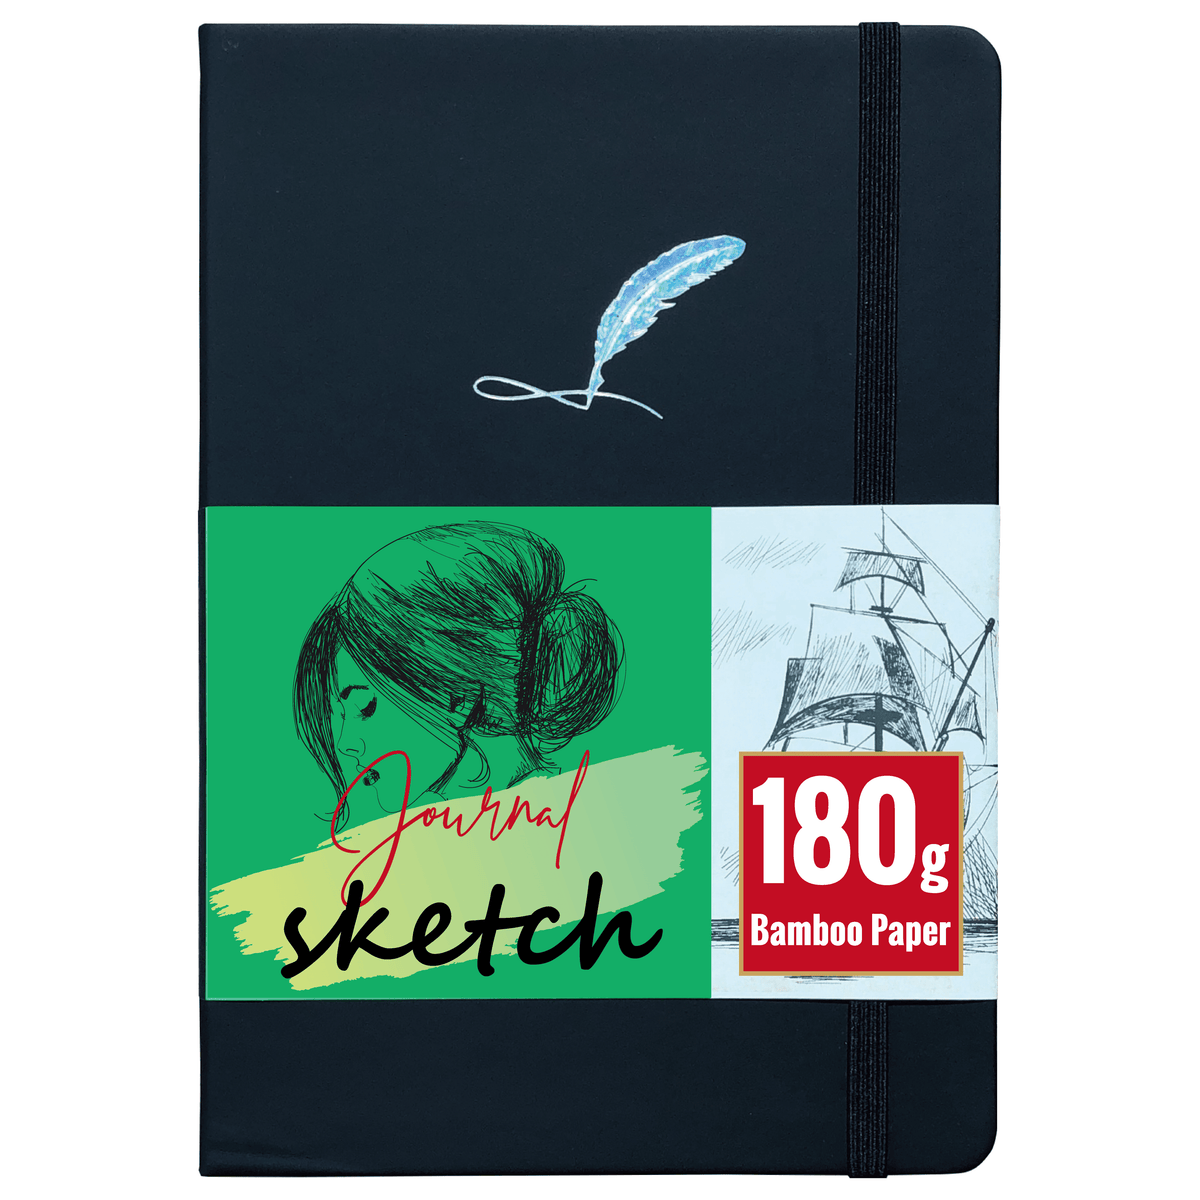 A5 Hardcover Sketchbook All Blank Pages, 180Gsm Bamboo Paper - bukenotebook